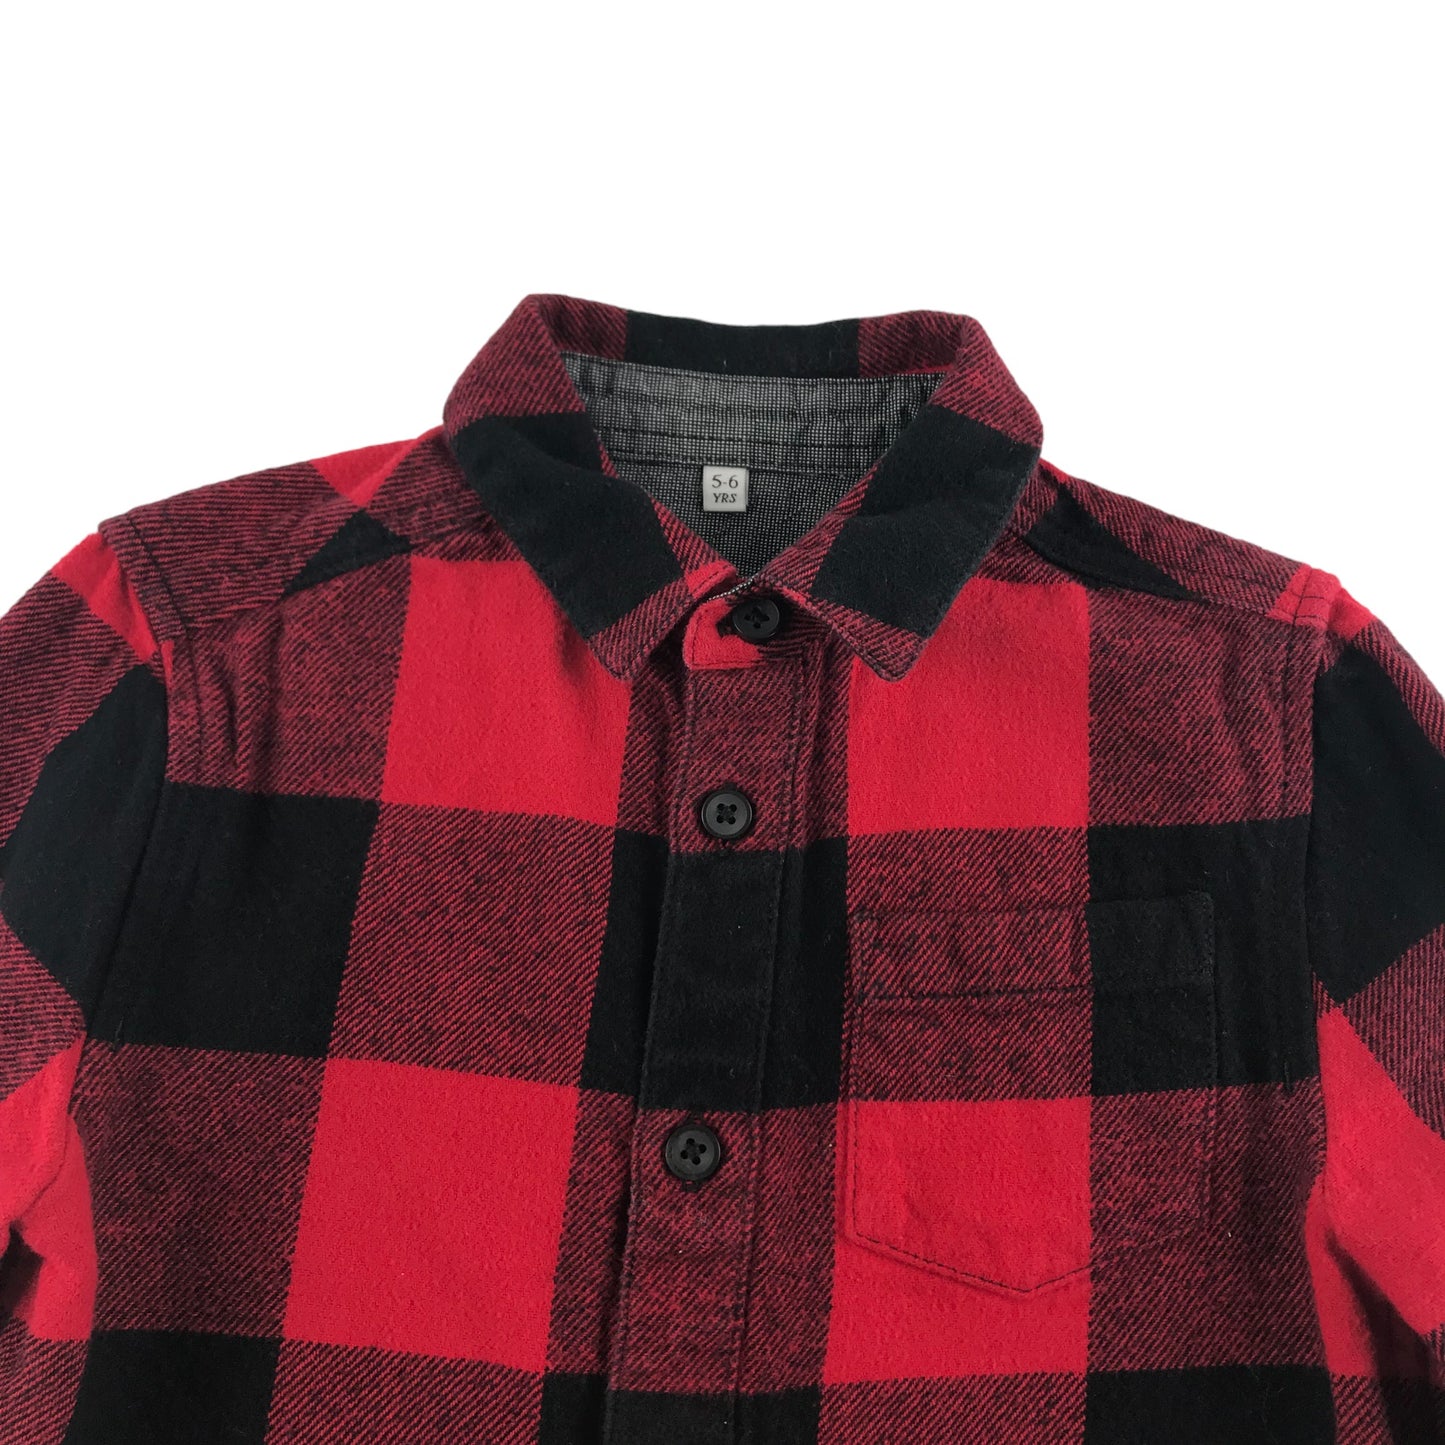 M&S Shirt Age 5 Red Chequered Cotton